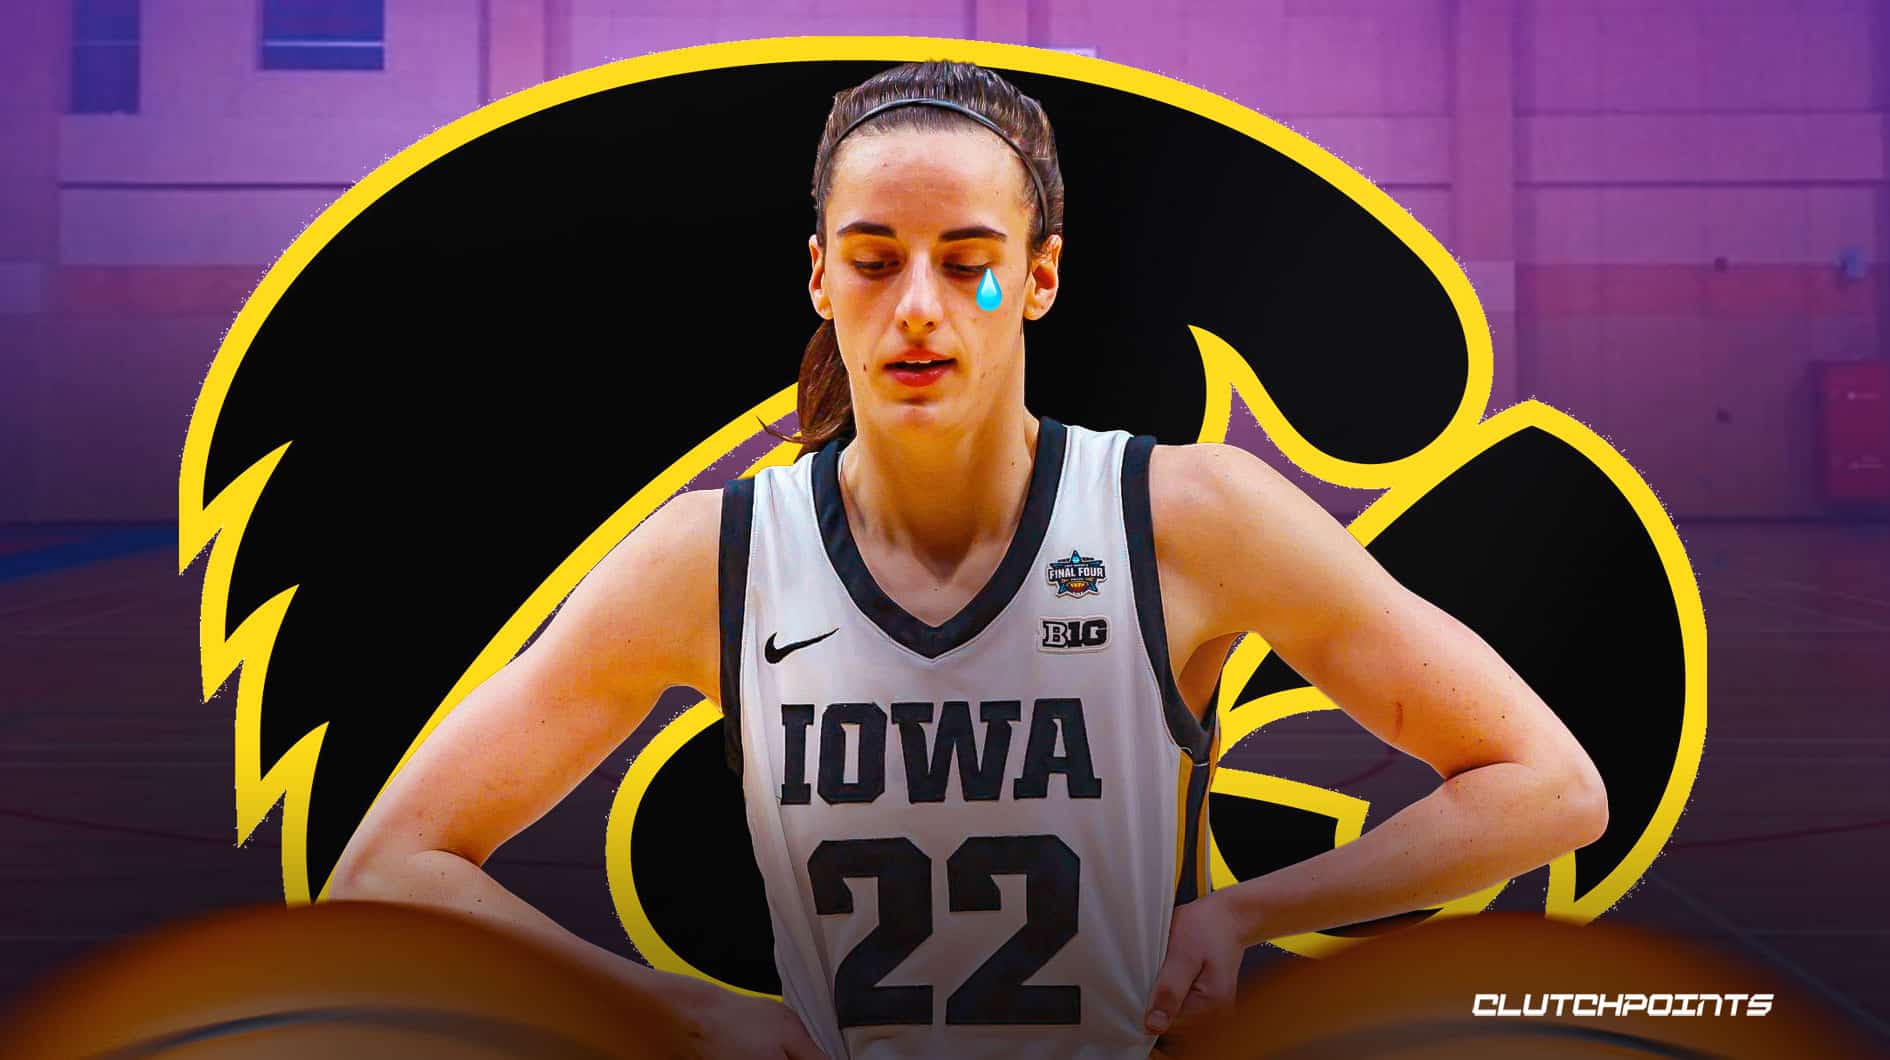 Iowa star Caitlyn Clark reacts to heartbreaking title game loss